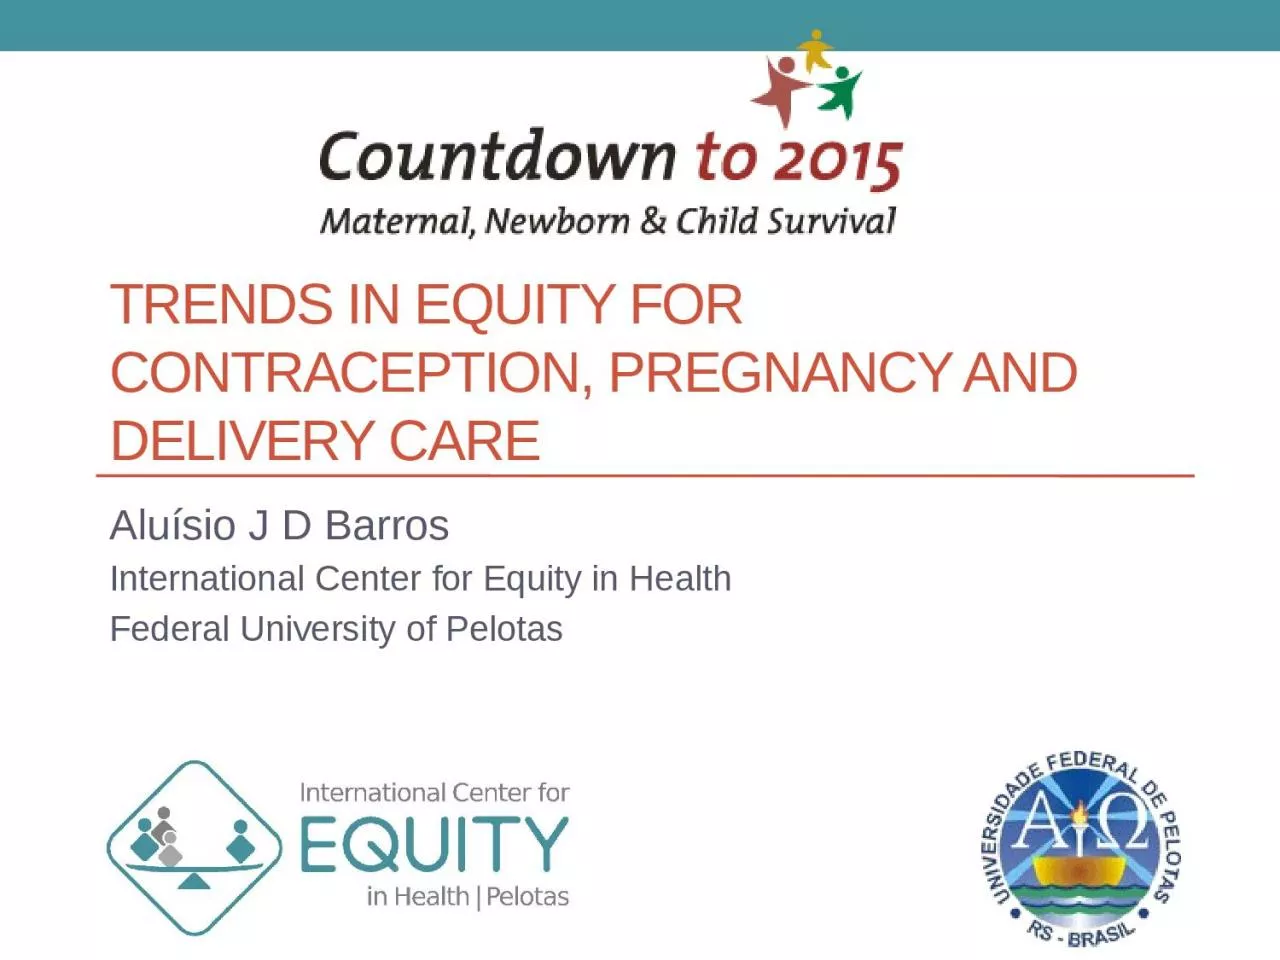 Trends in equity for contraception, pregnancy and delivery care